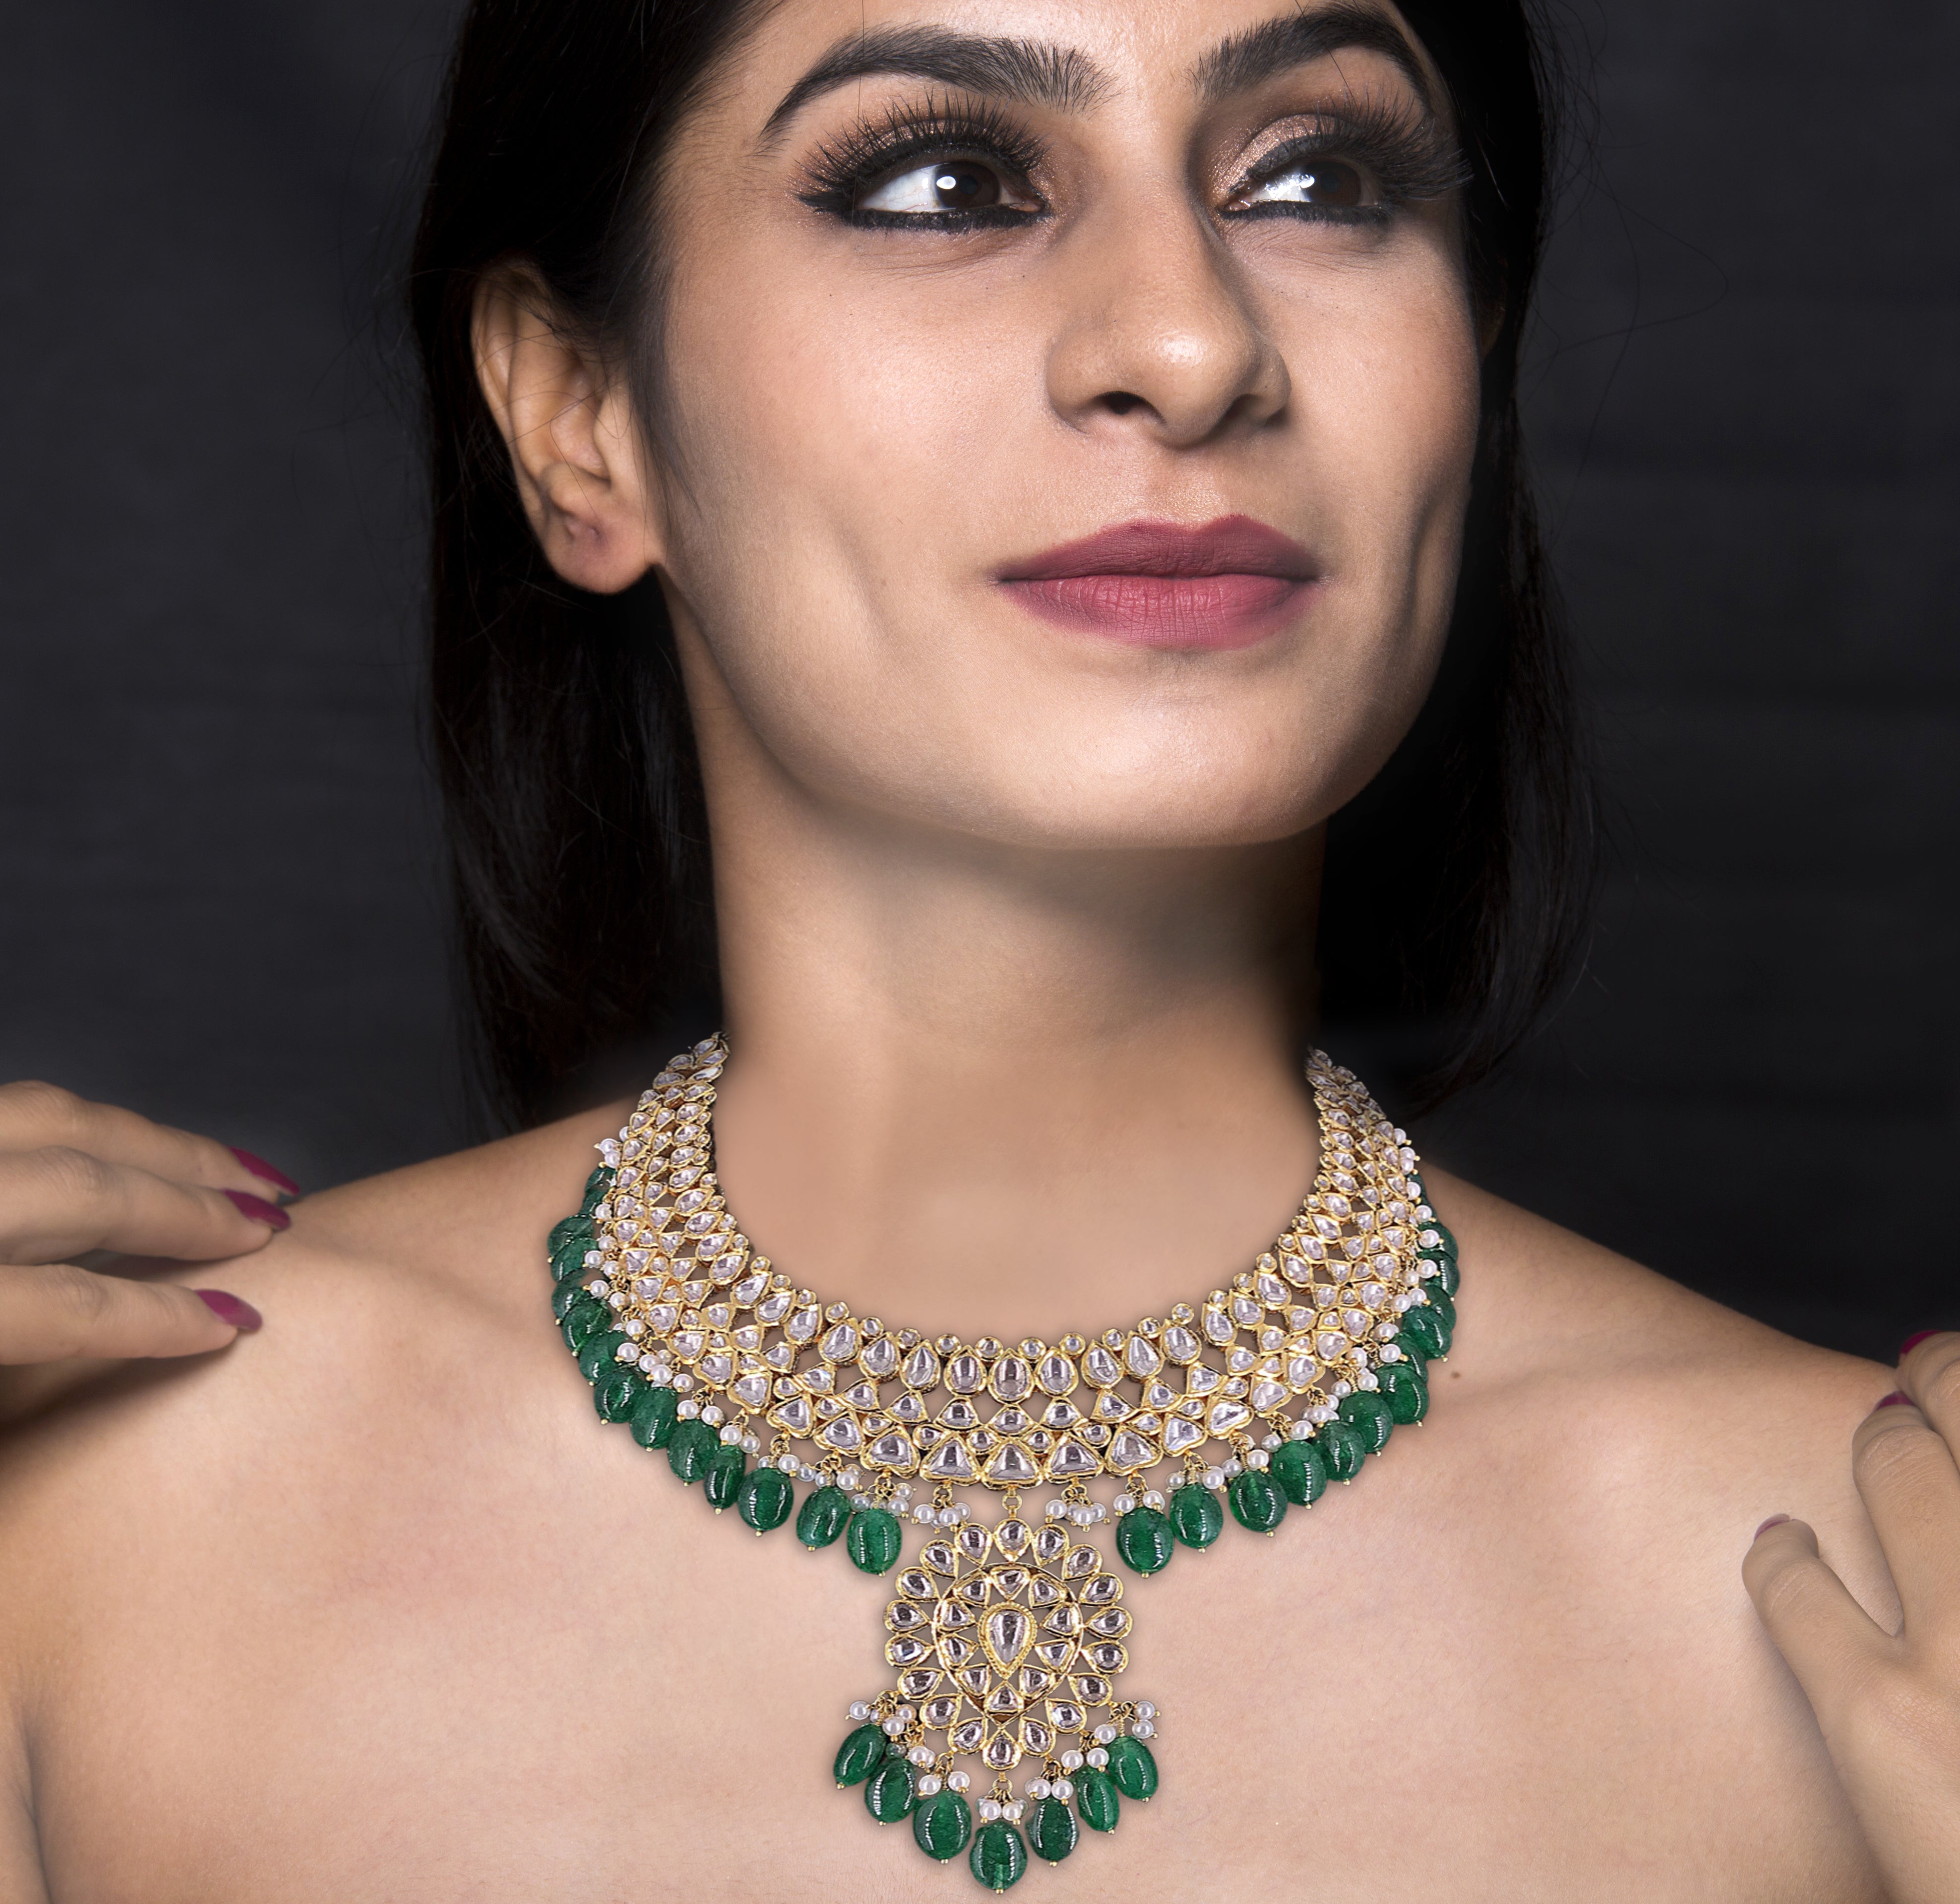 18k Gold and Diamond Polki Necklace Set with emerald-grade Green Beryls and Pearls